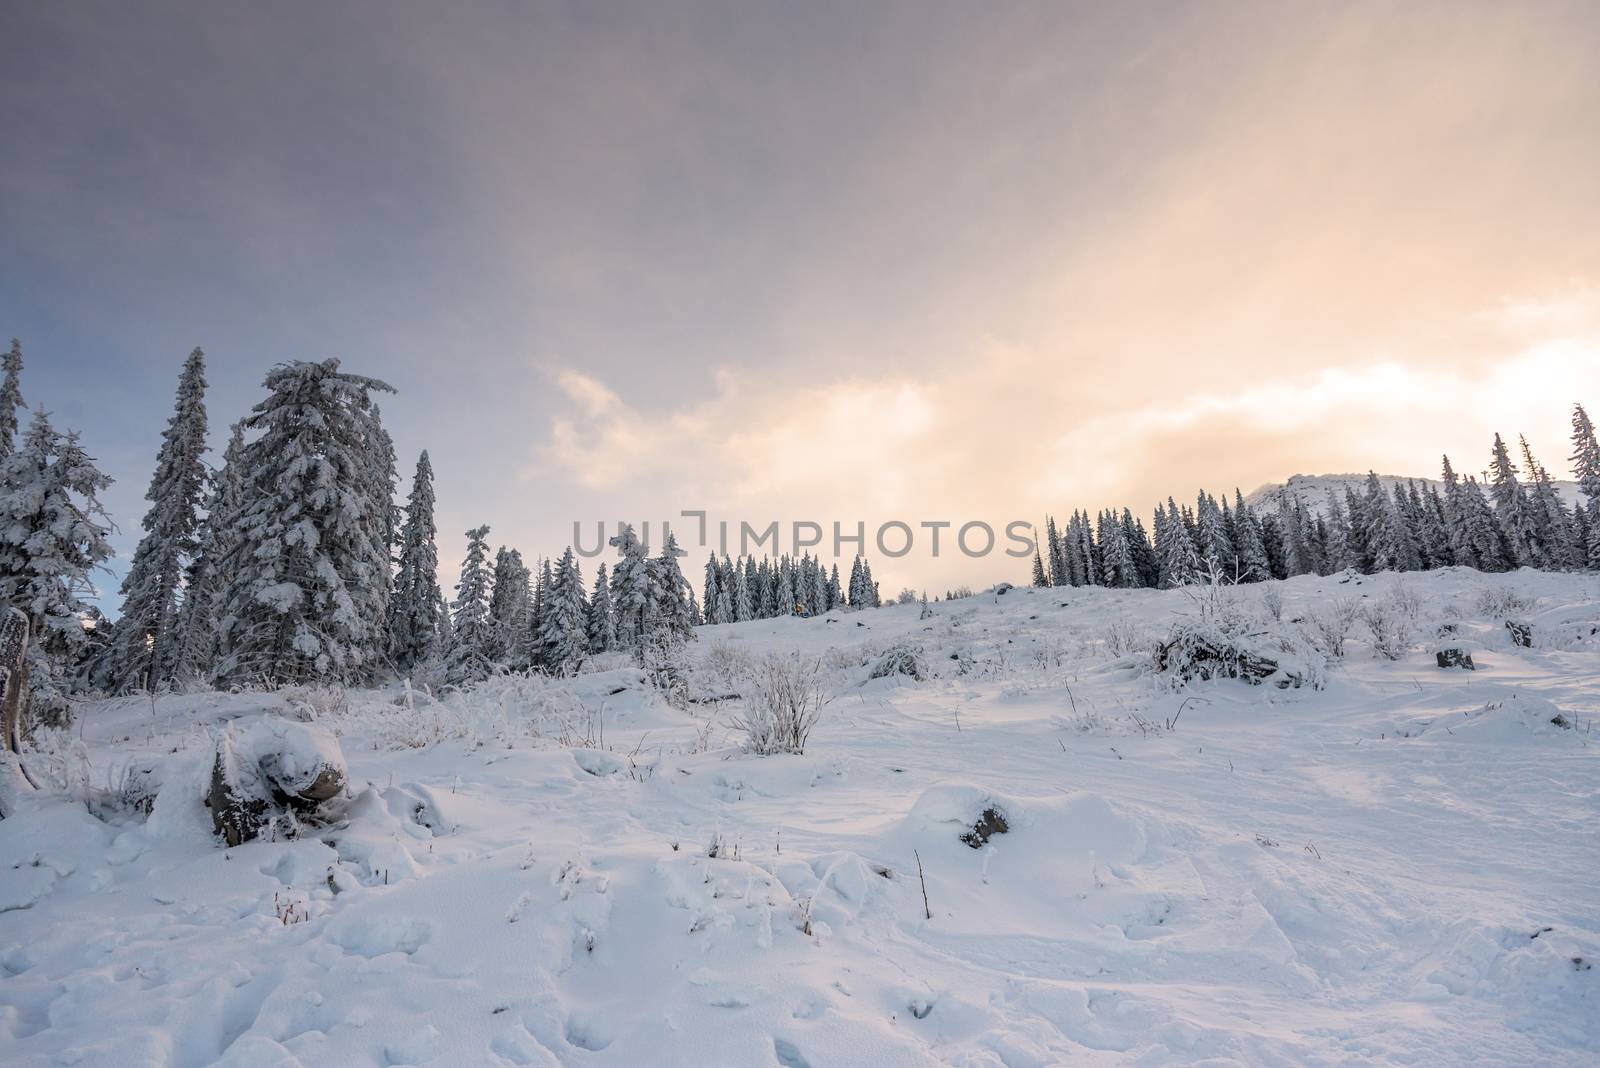 Snowy landscape at sunset, frozen trees in winter in Bulgaria.